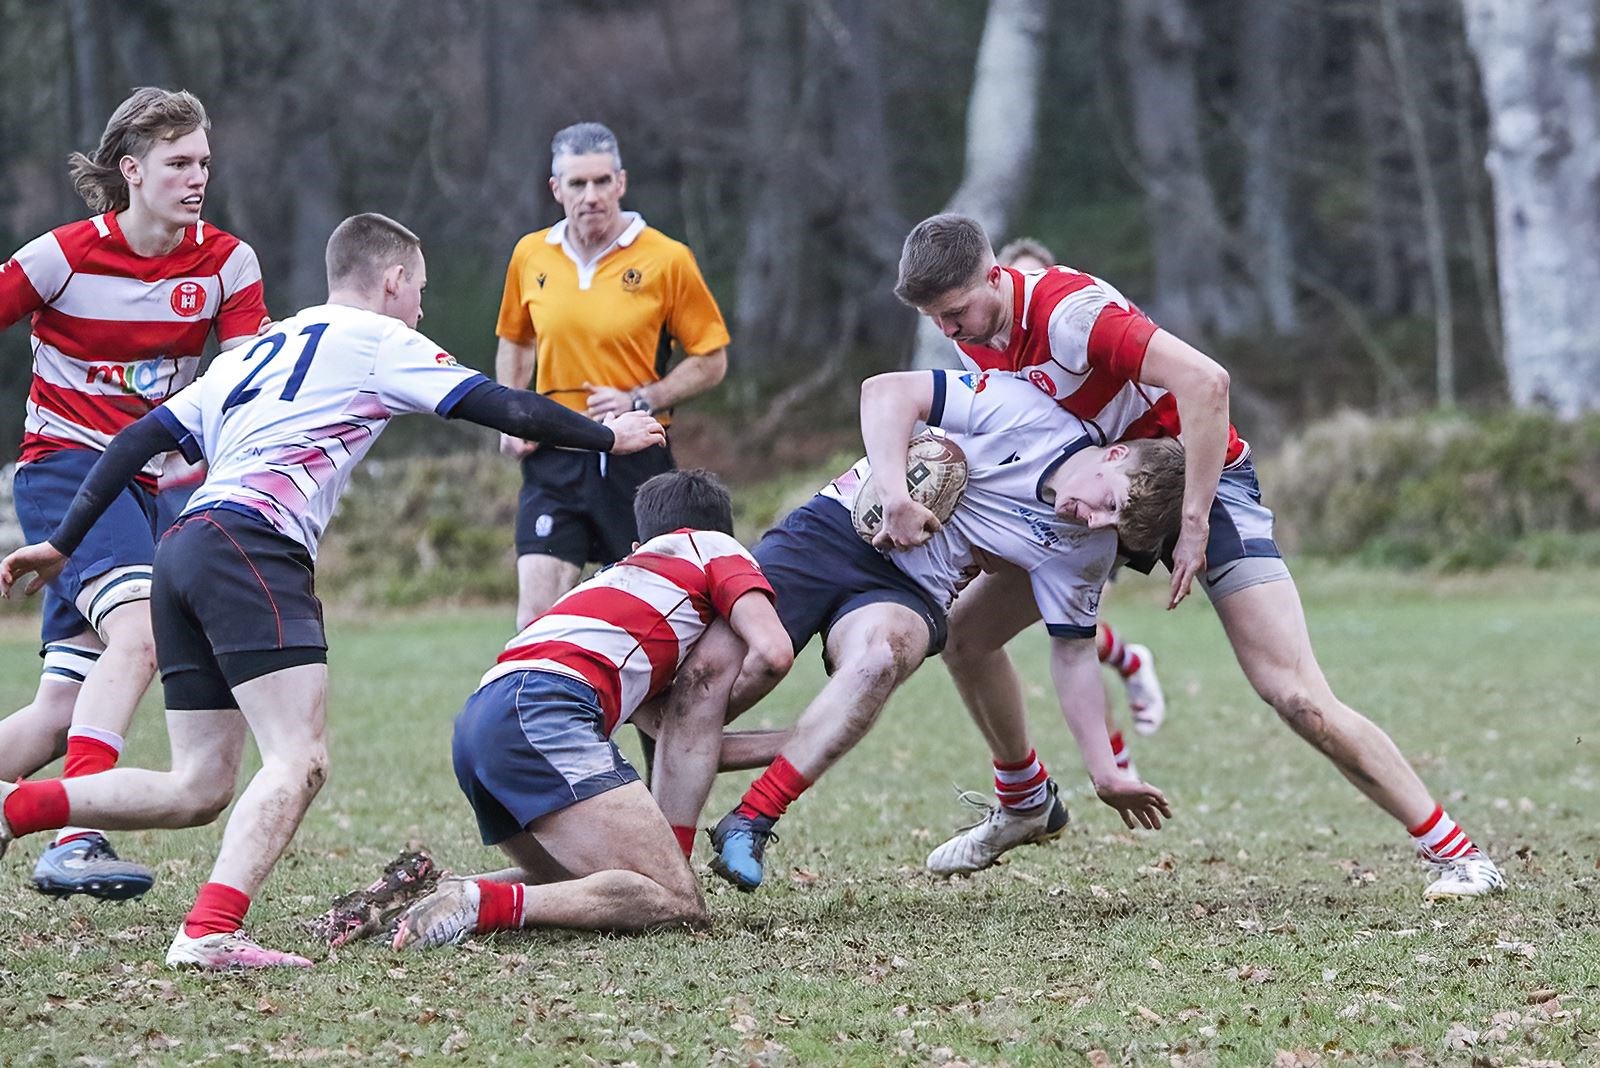 Stewart Bright and Rory Millar tackle. Calum Caven coming in to help. Picture: John Macgregor